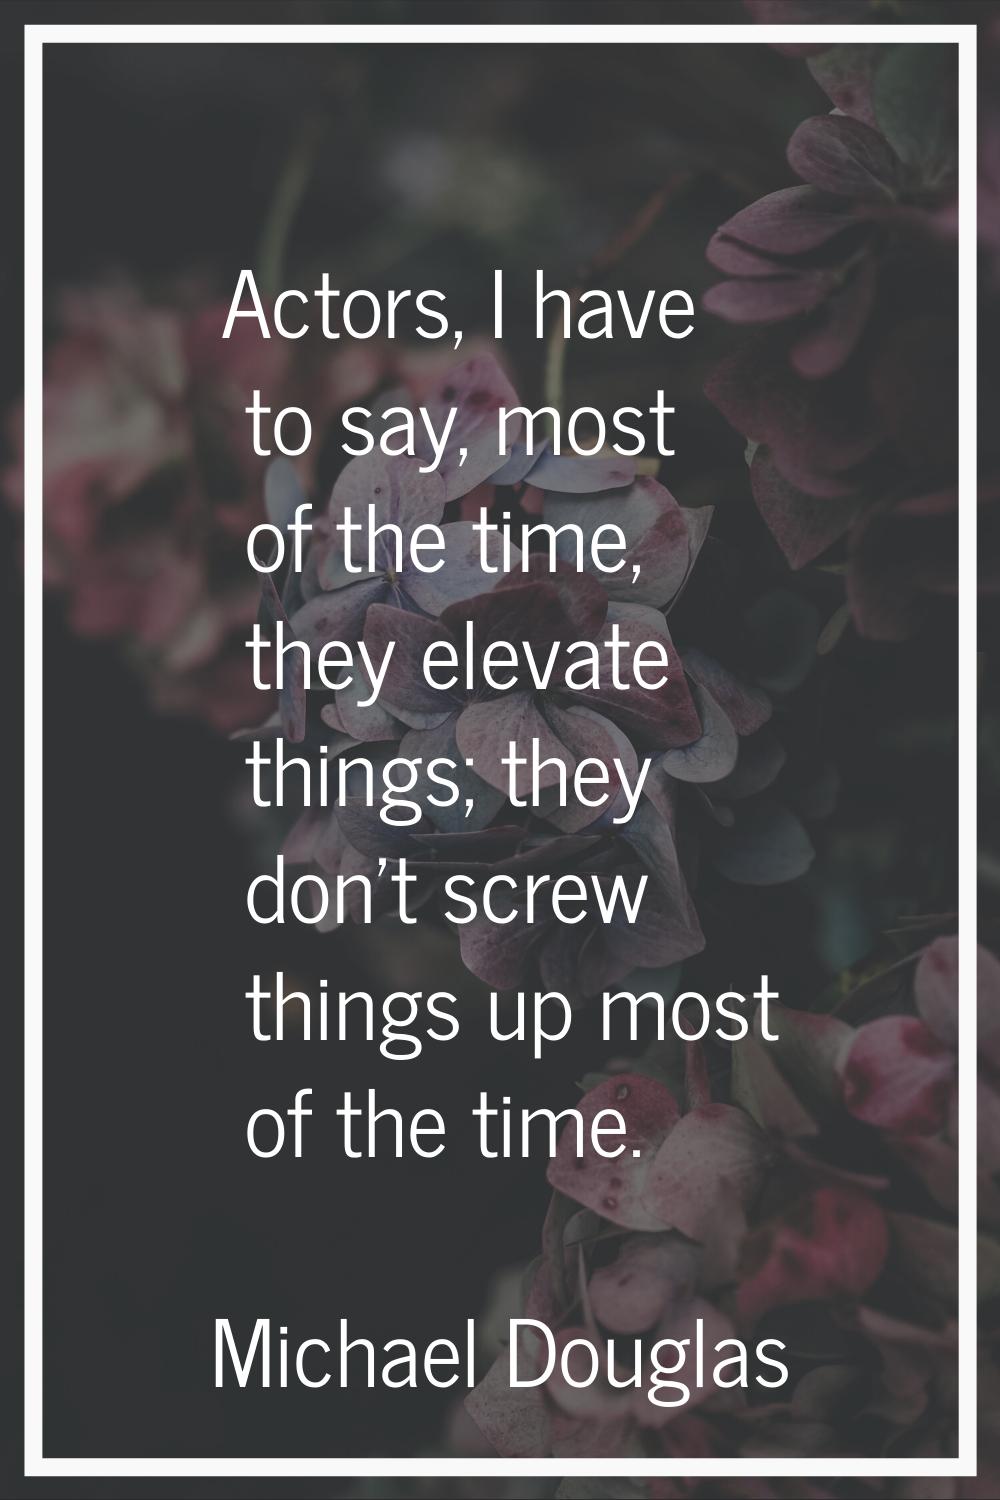 Actors, I have to say, most of the time, they elevate things; they don't screw things up most of th